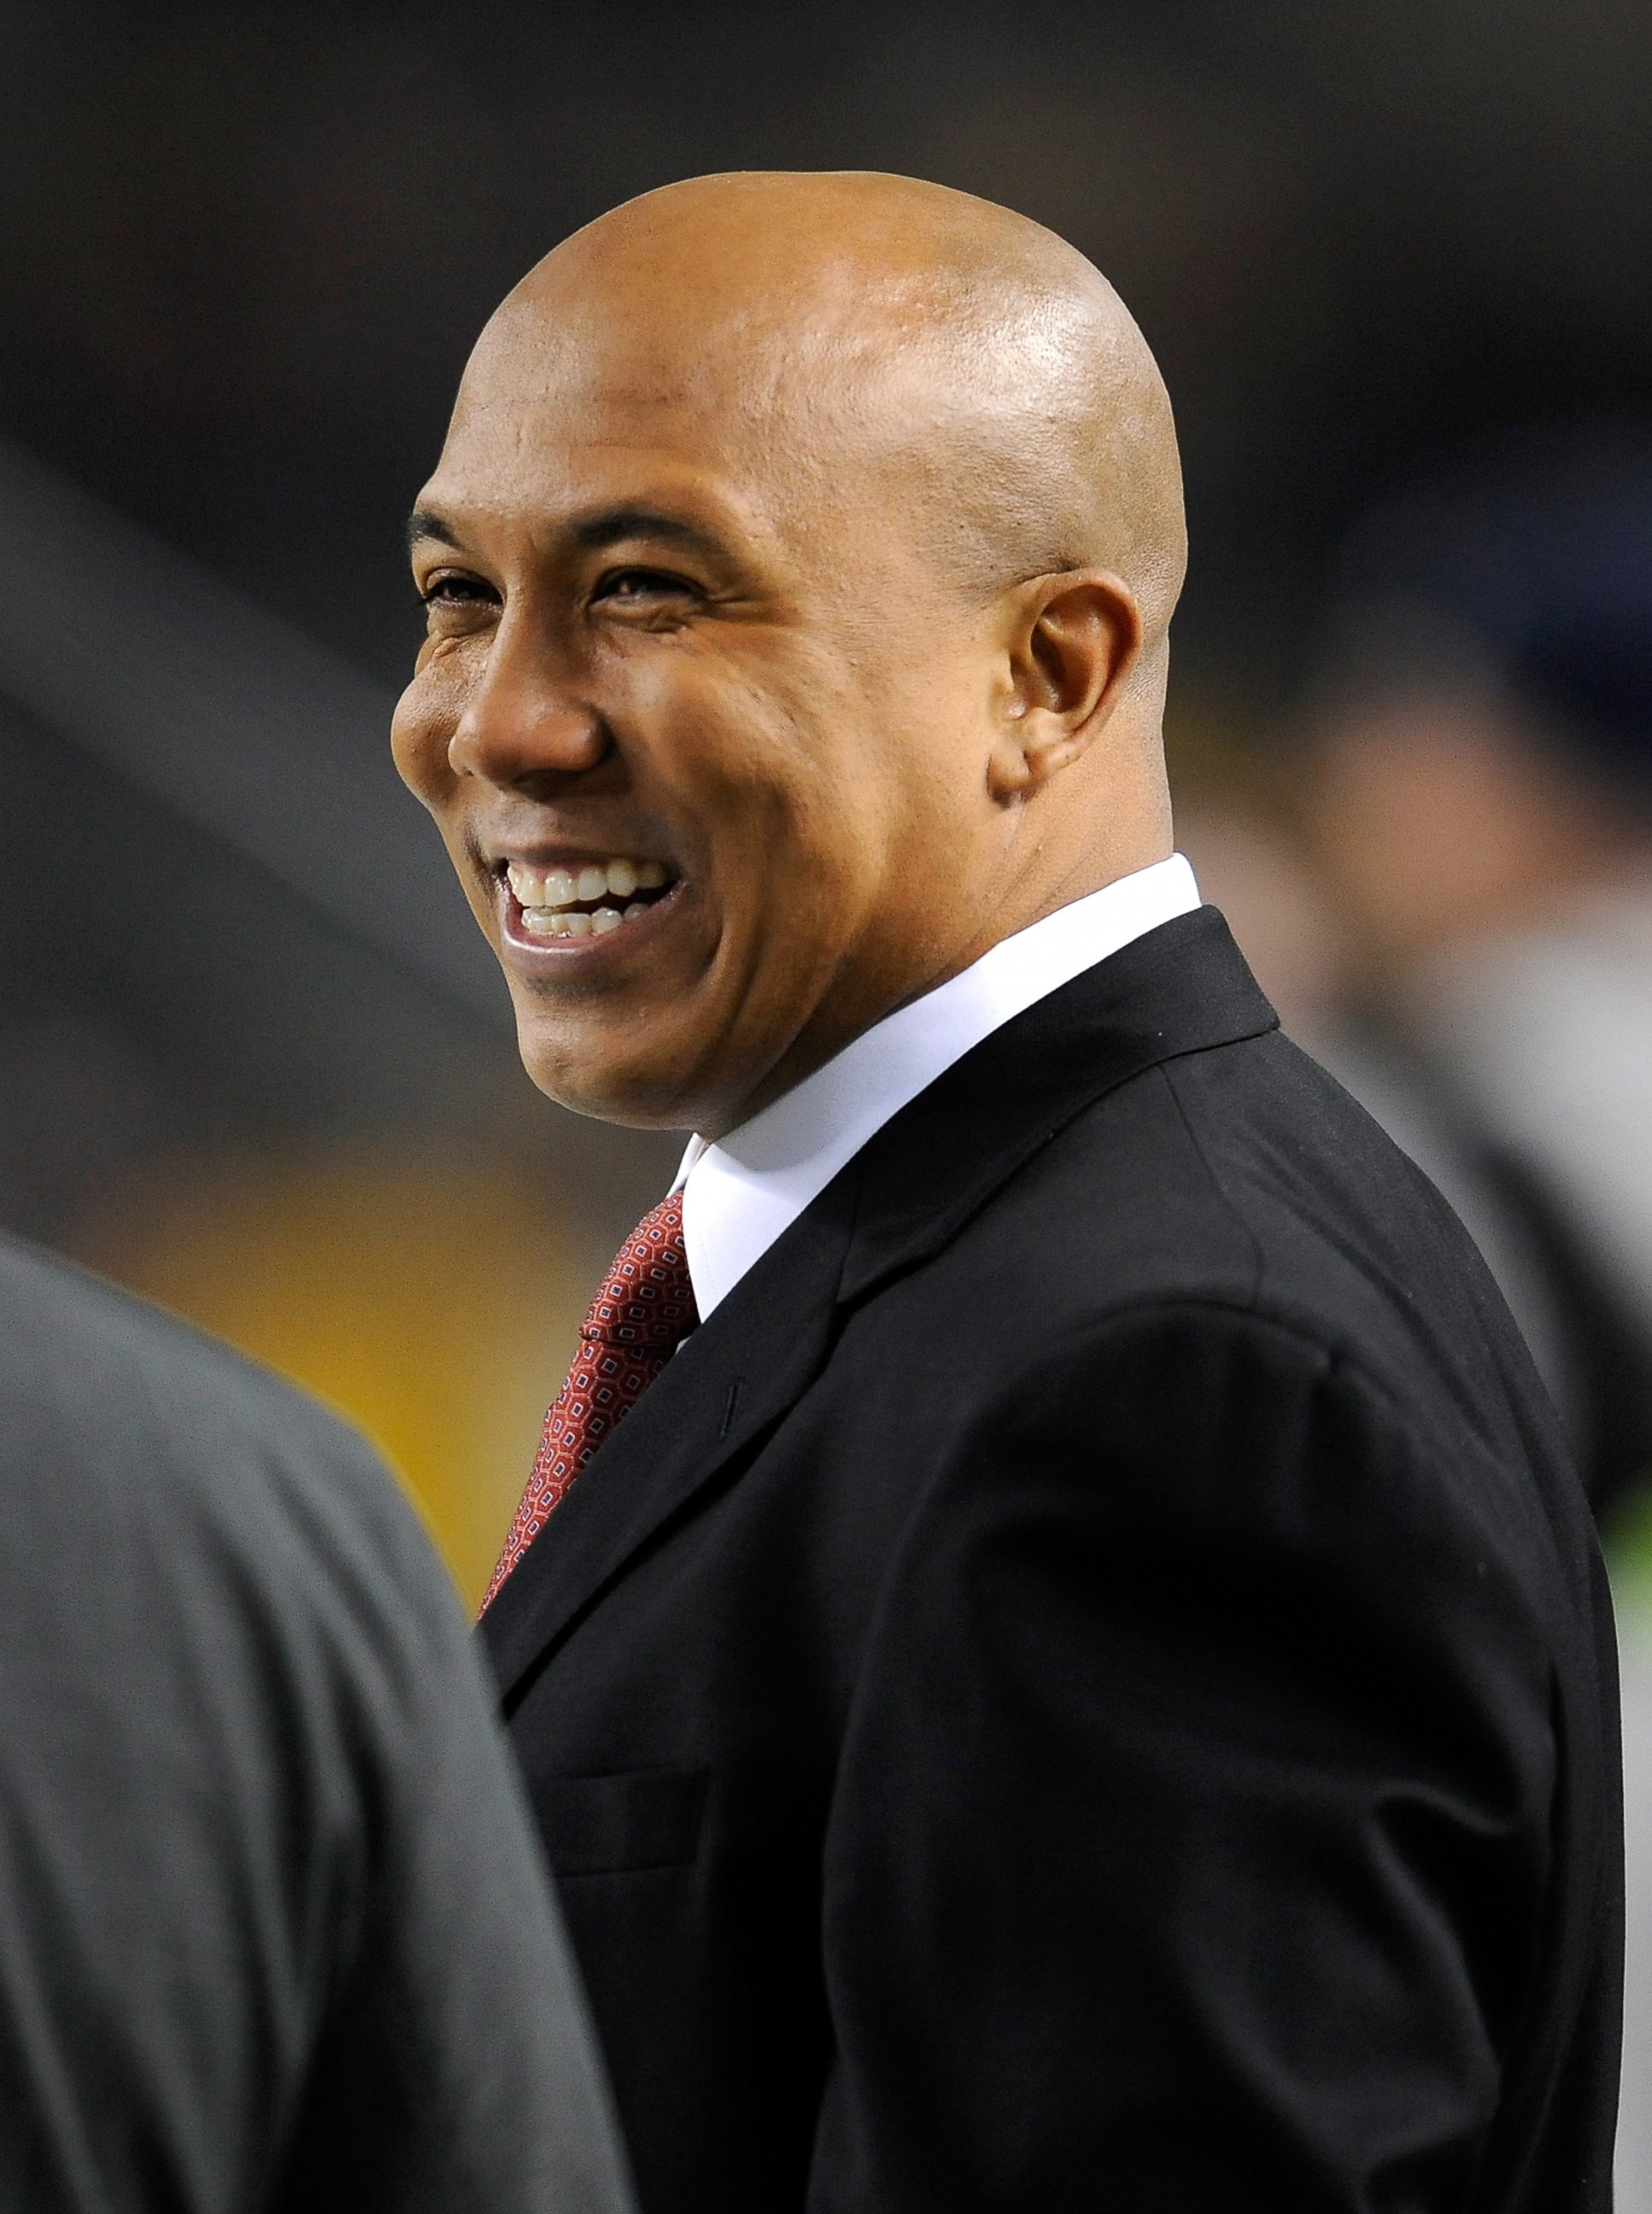 PHOTO: Announcer Hines Ward looks on before the game between the Pittsburgh Steelers and the Baltimore Ravens on Nov. 18, 2012, at Heinz Field in Pittsburgh, Pa.